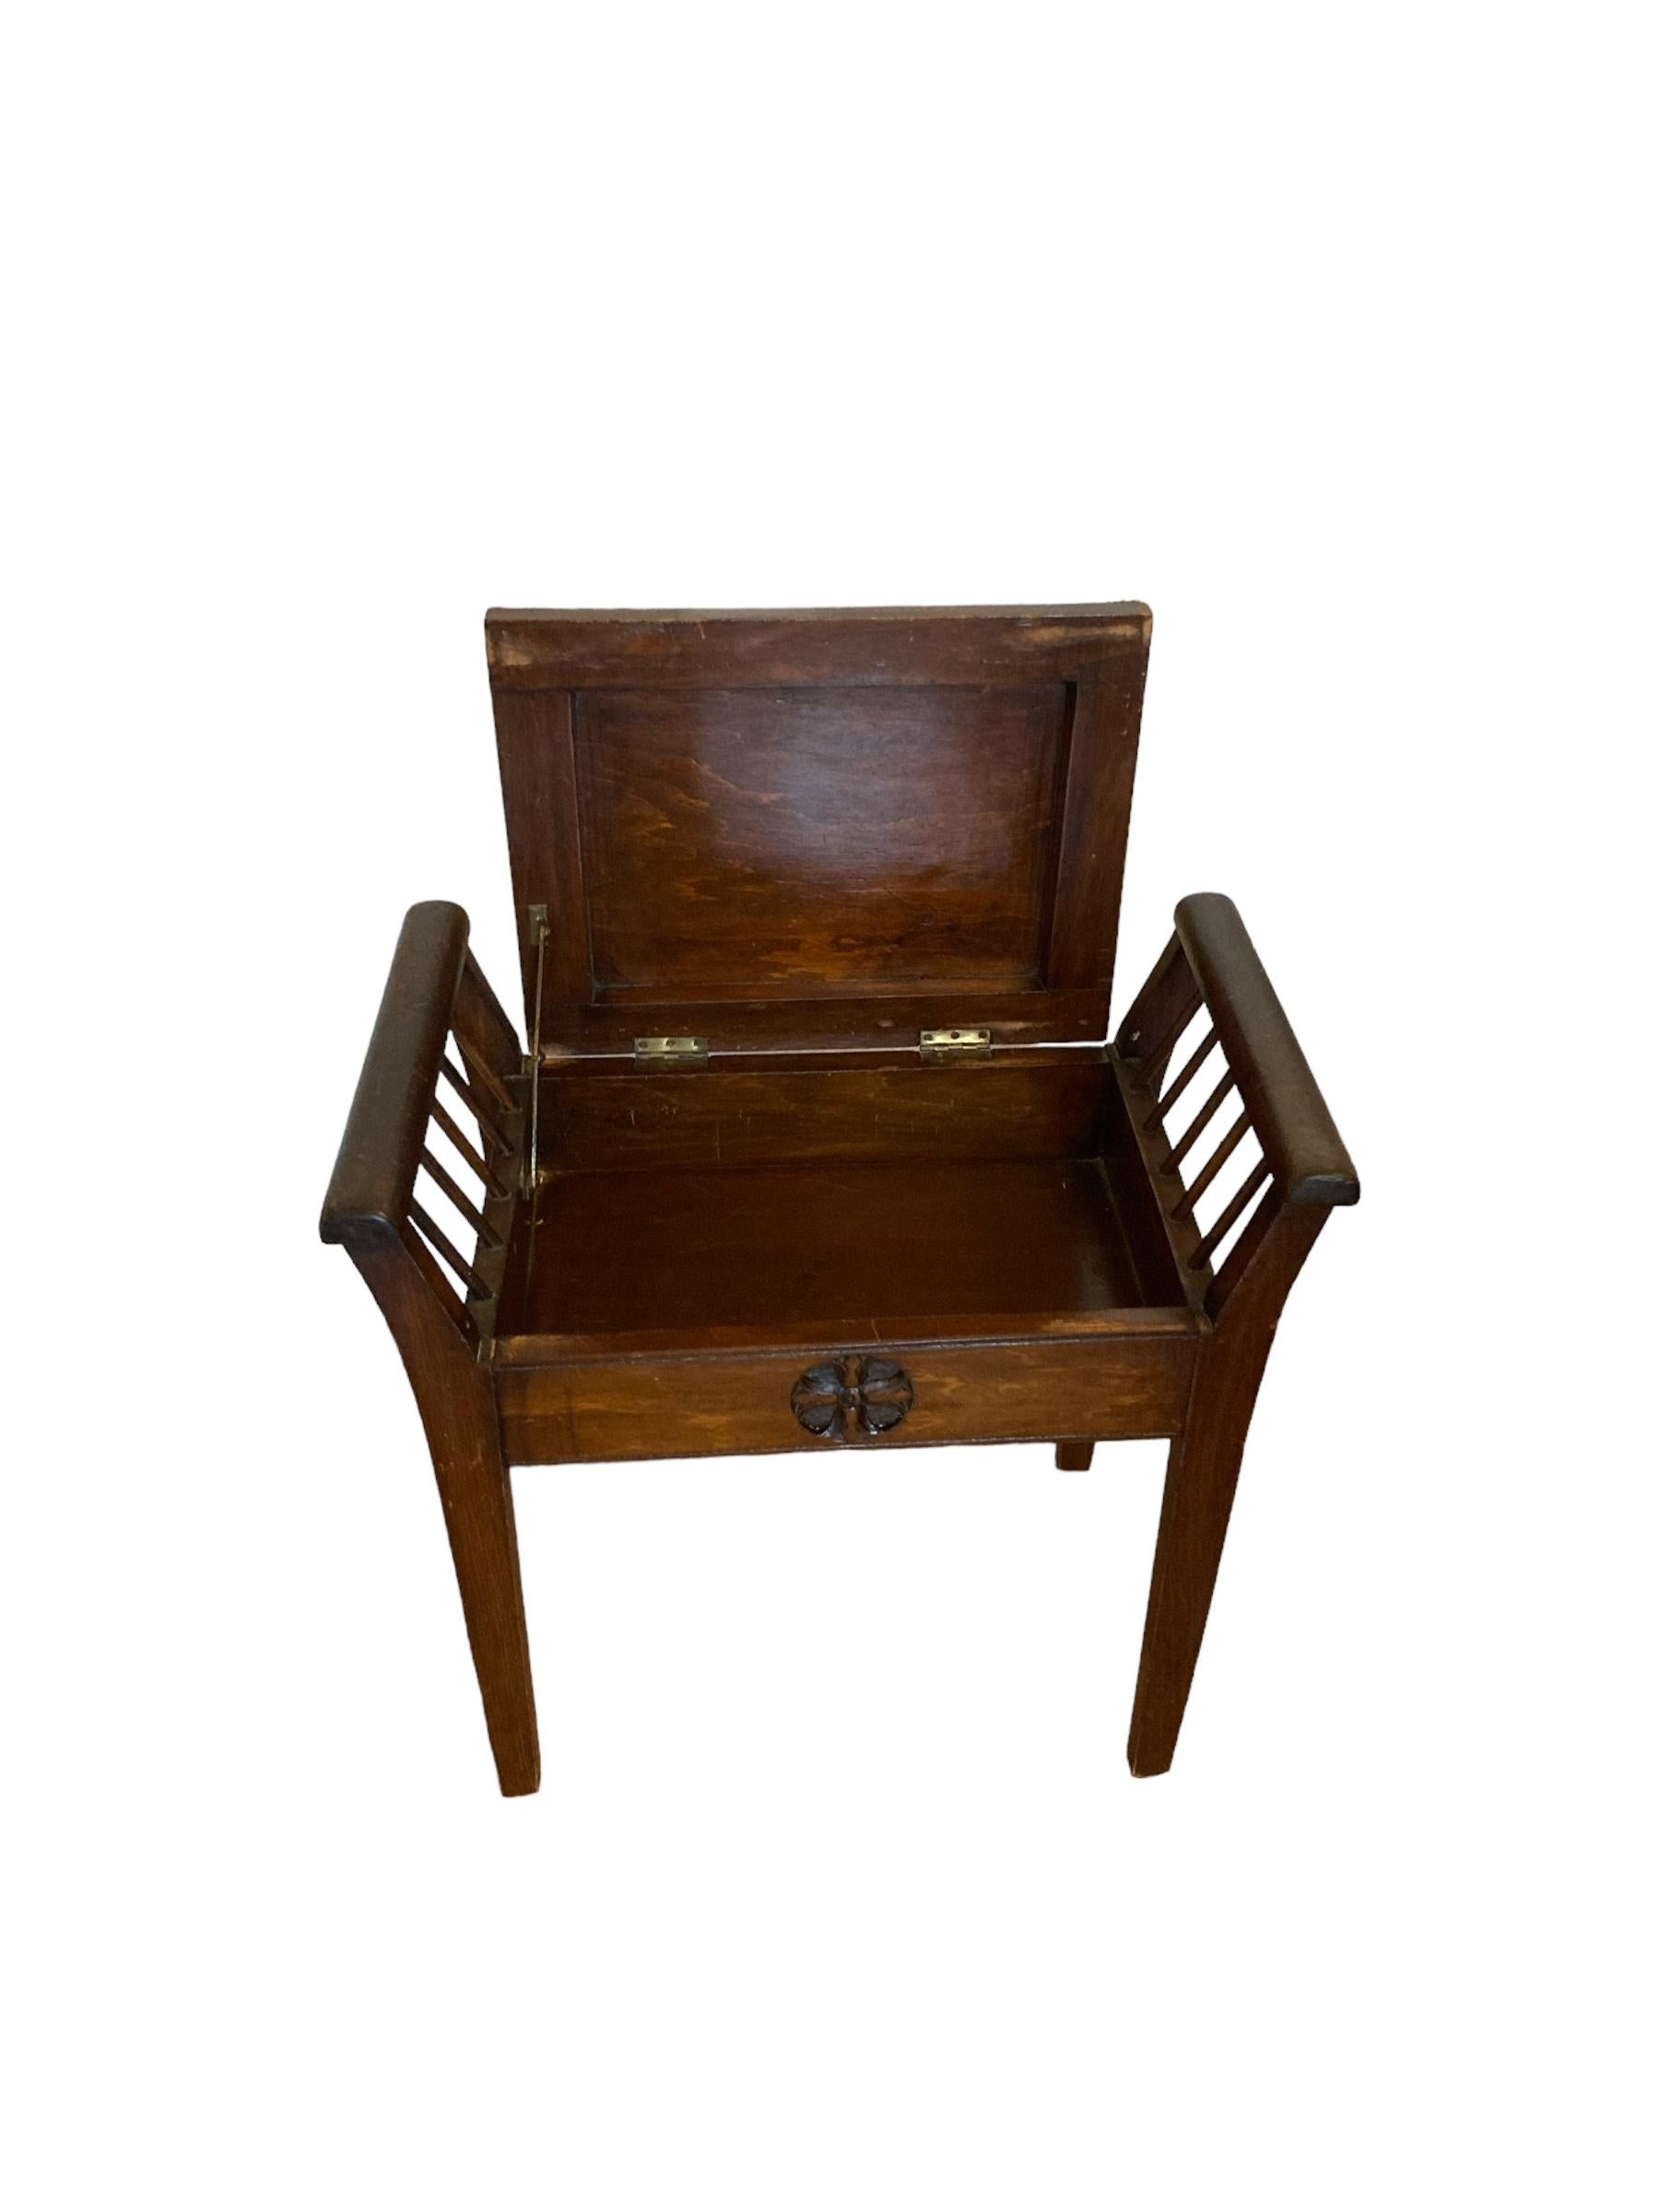 Carved Edwardian Mahogany Piano Stool with Carving For Sale